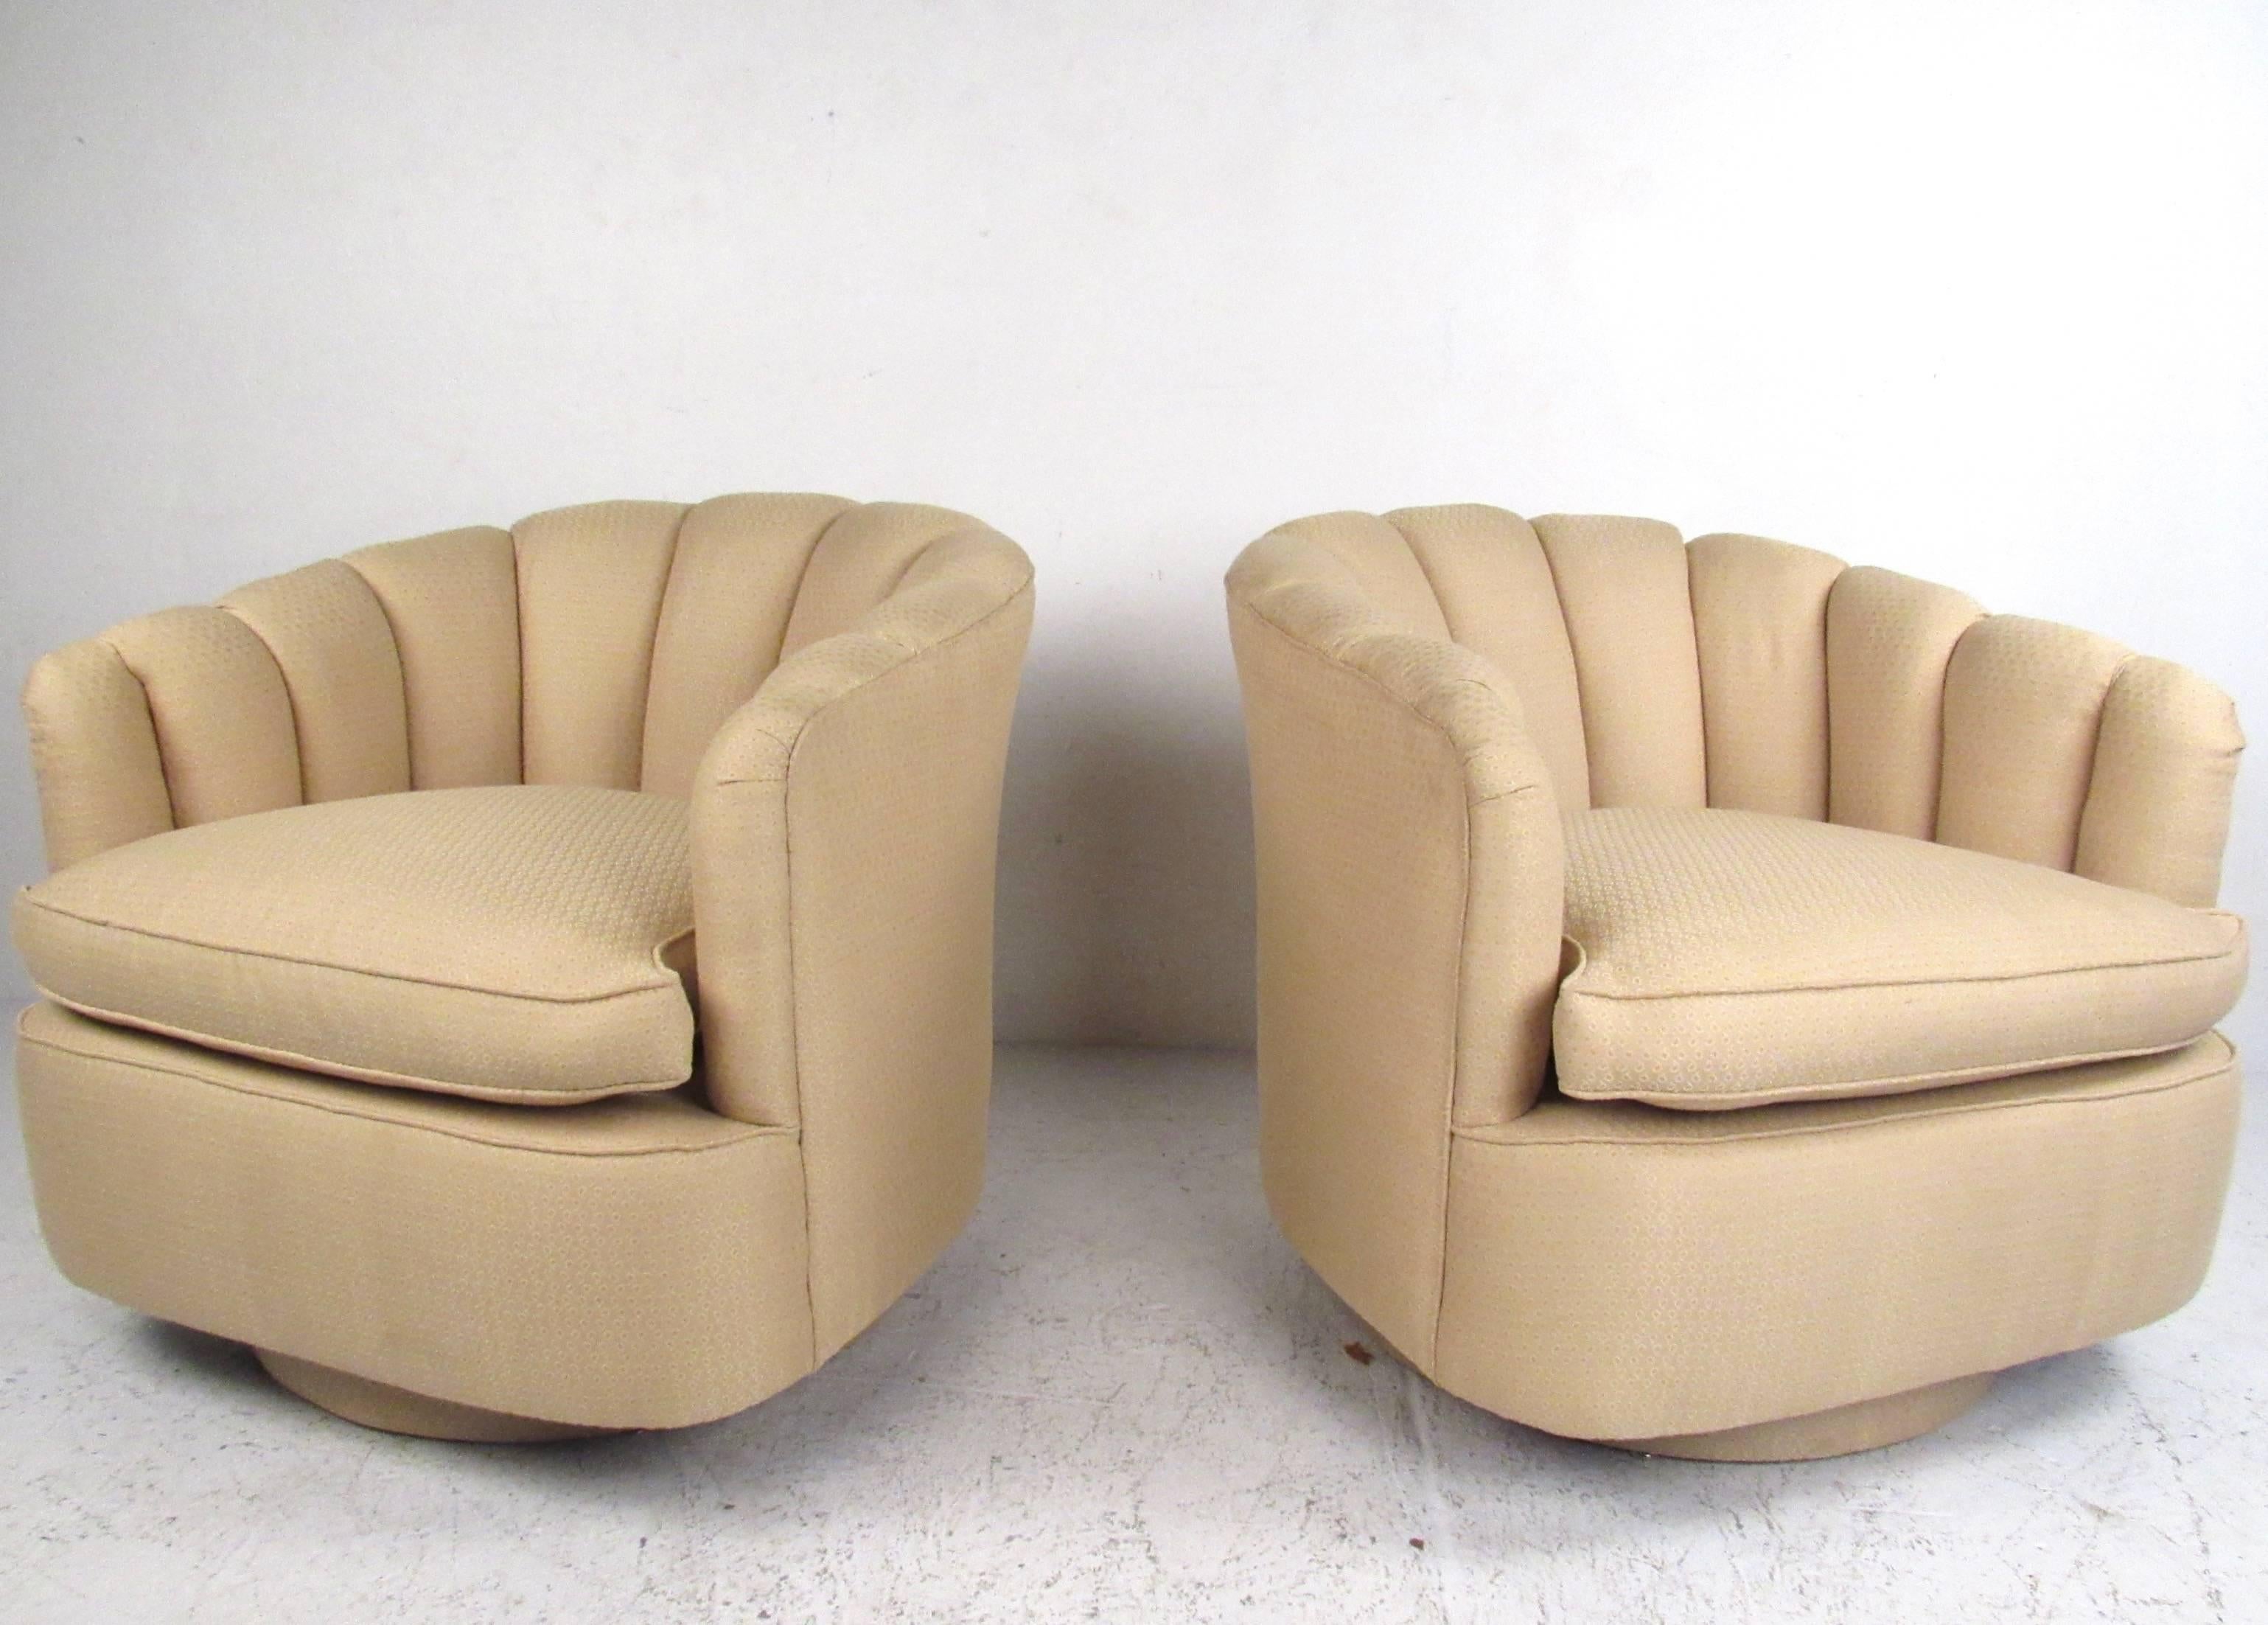 This pair of unique modern lounge chairs make an elegant addition to any living room or office setting. Swivel bases and scalloped rounded seat backs add to the charm of this plush matching pair and also adds a Mid-Century feel in the style of Milo